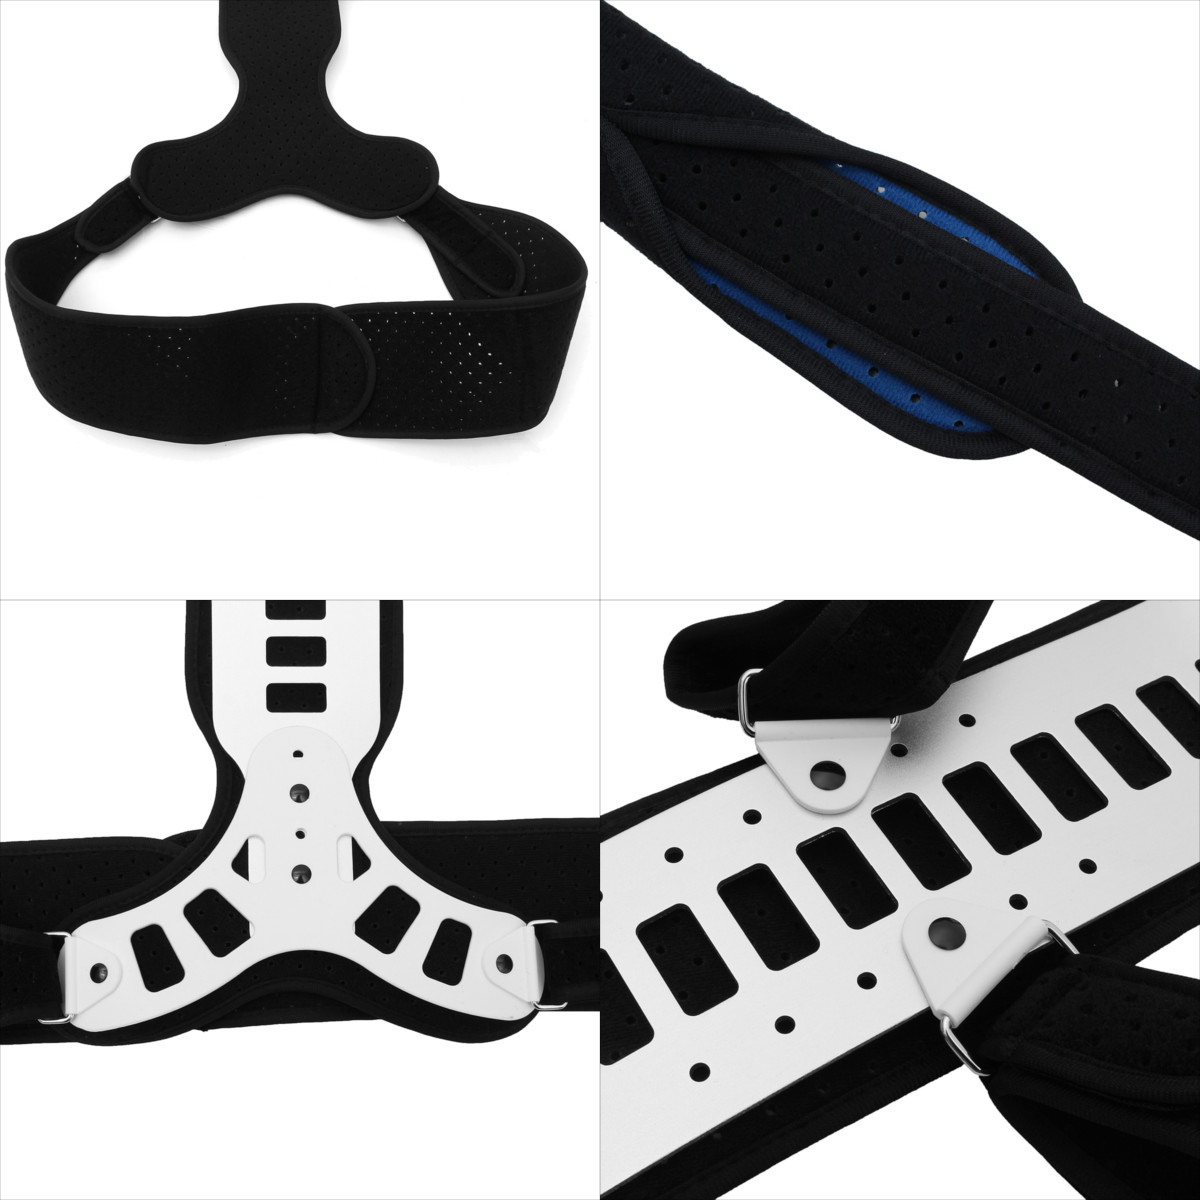 Spinal-Brace-Support-Spine-Recover-Orthotics-Kyphosis-Posture-Corrector-1259435